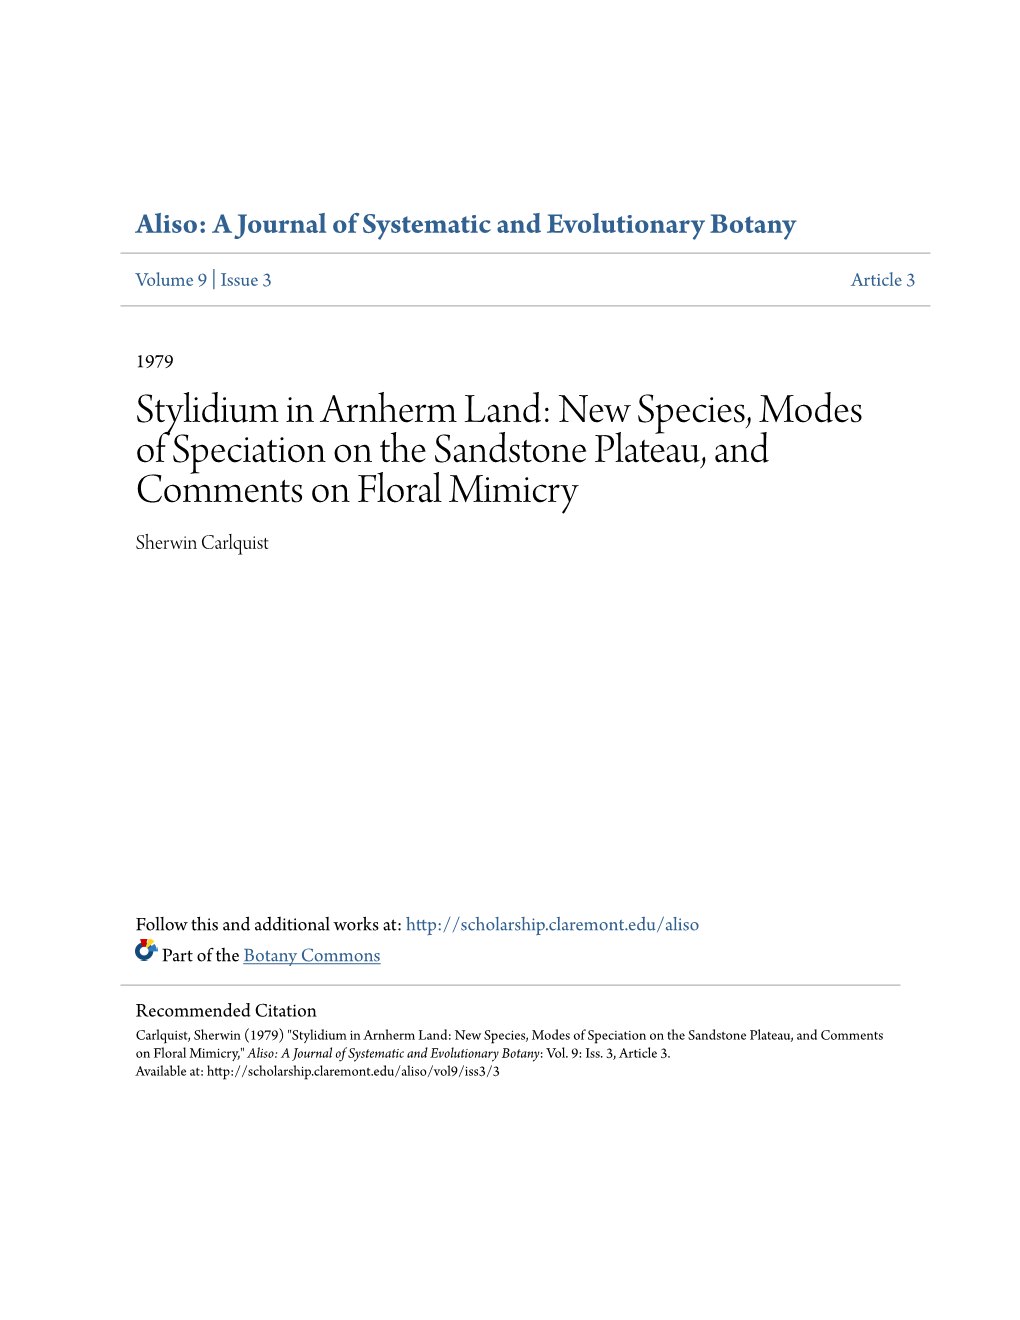 Stylidium in Arnherm Land: New Species, Modes of Speciation on the Sandstone Plateau, and Comments on Floral Mimicry Sherwin Carlquist